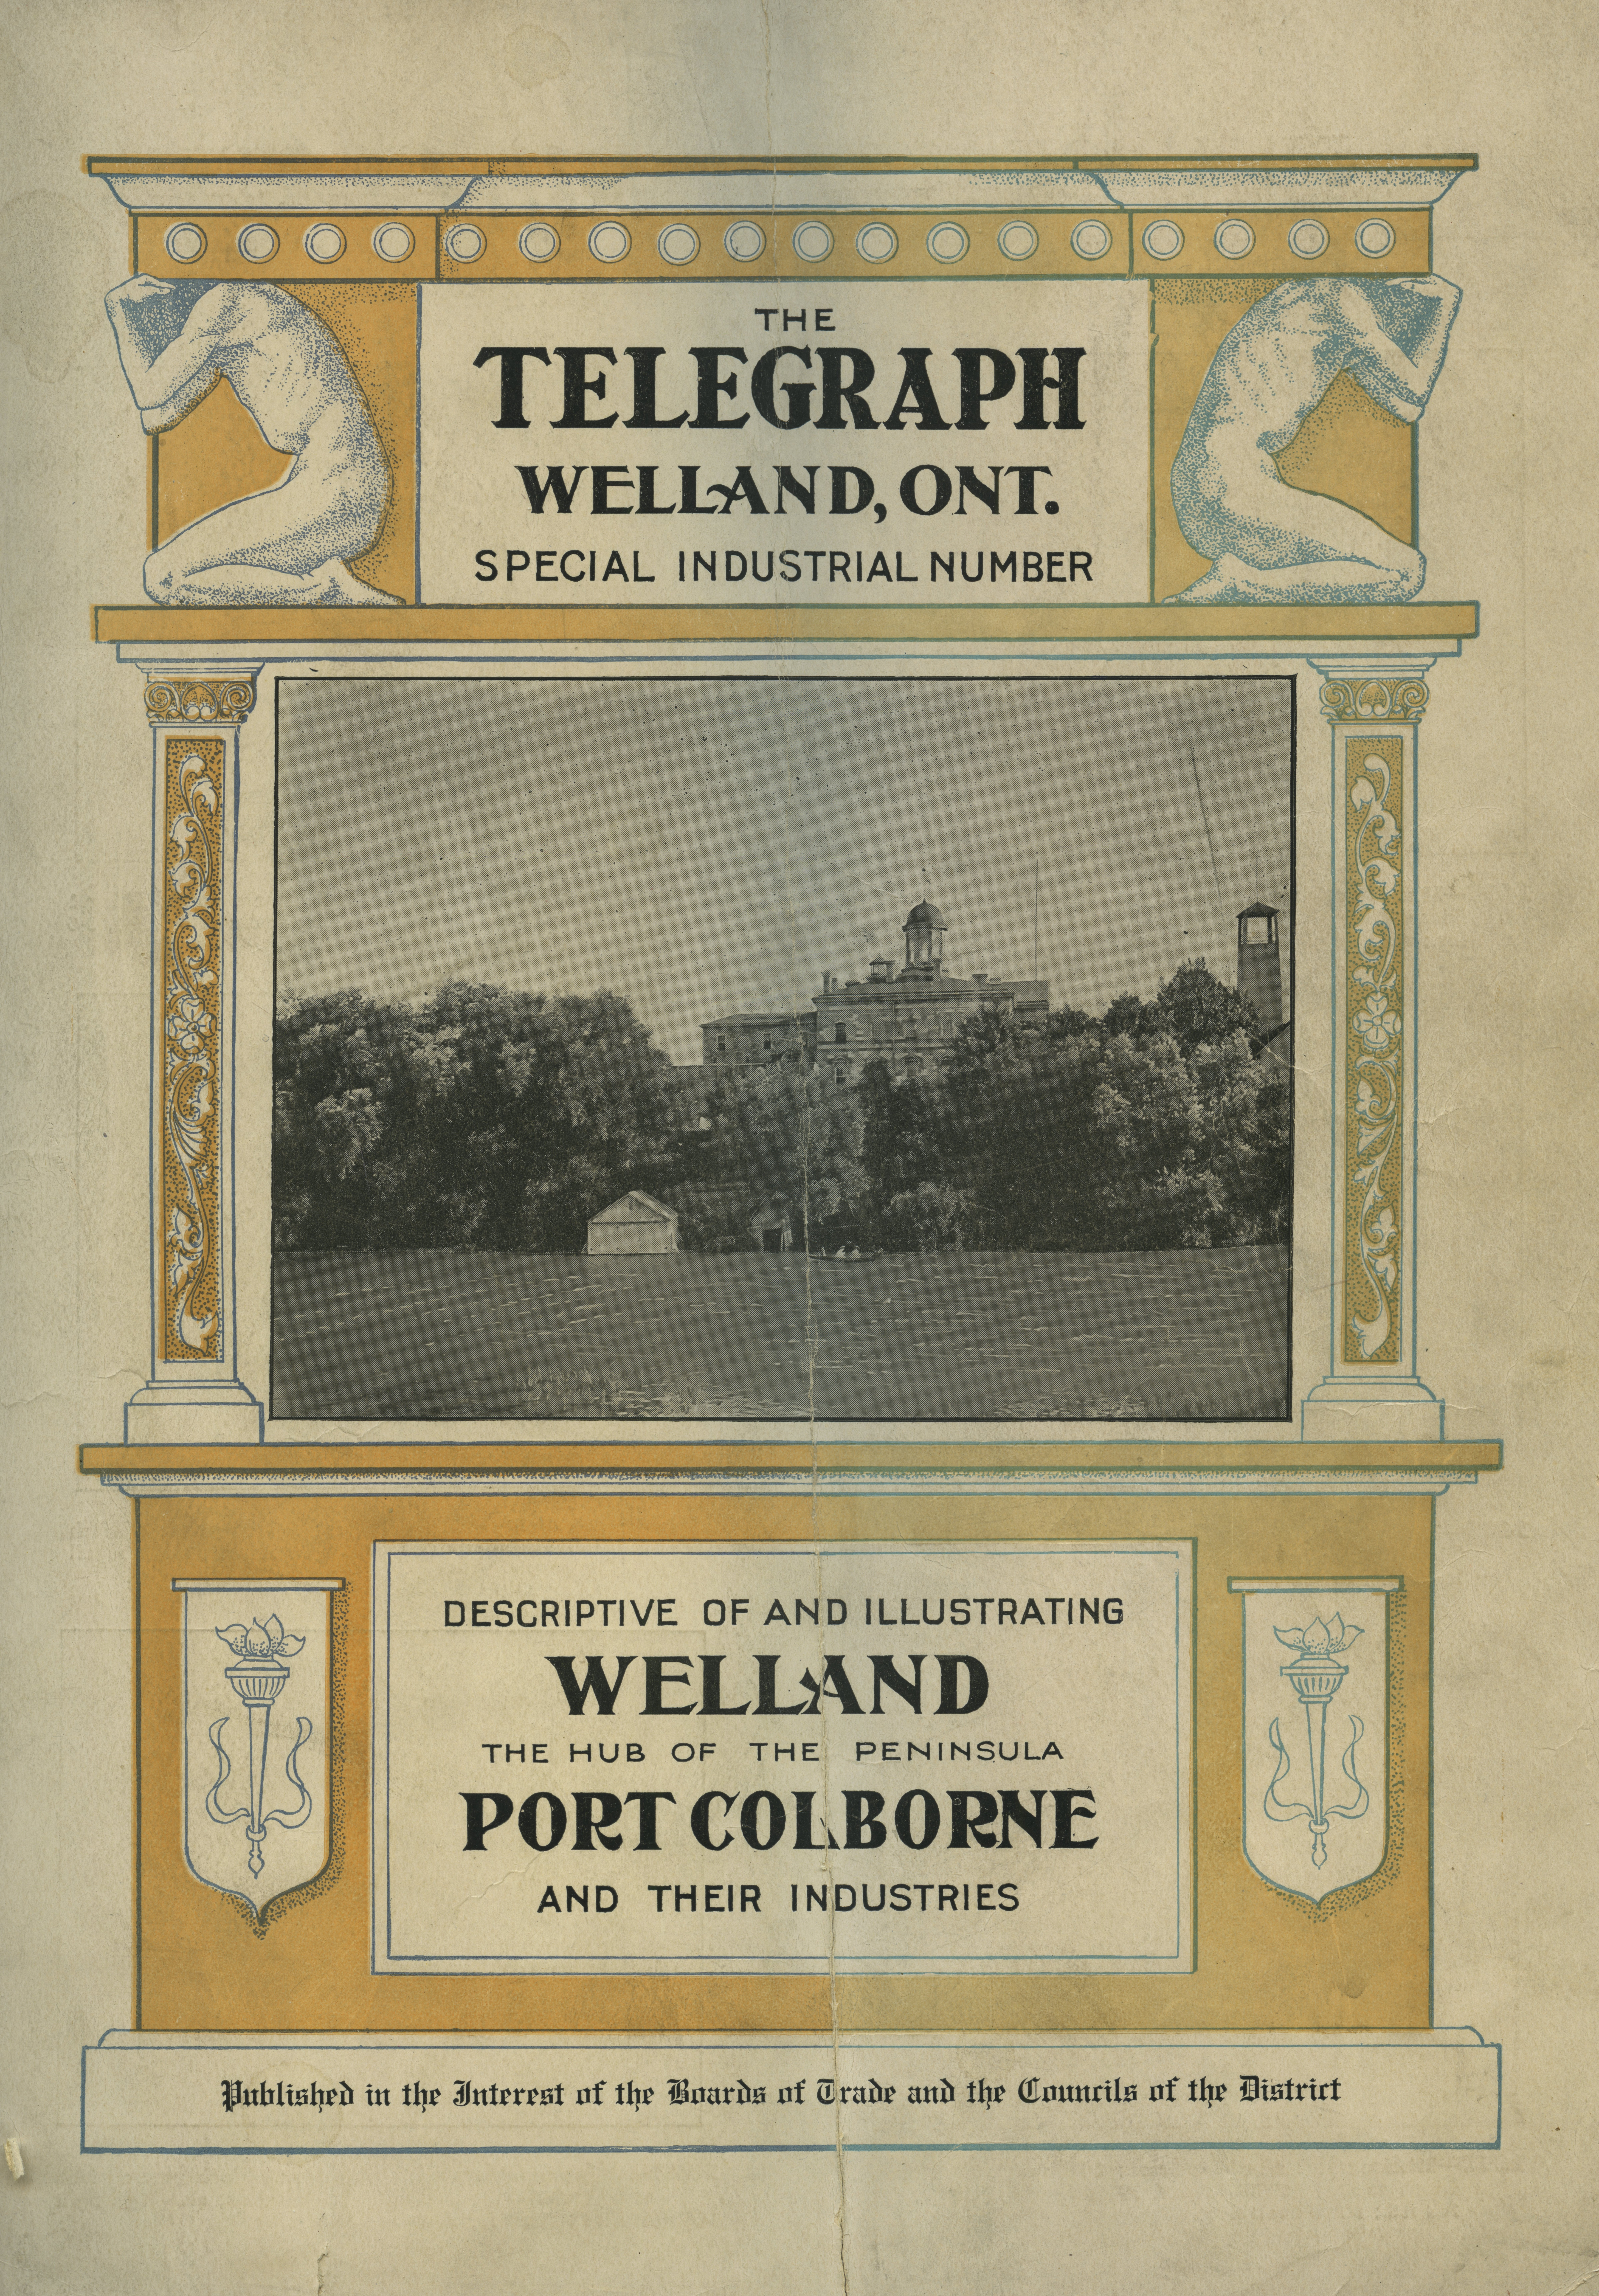 An old page of promotional material. A black and white image of trees and a building is framed by illustrations in yellow and blue/gray. The title is "the telegraph welland, ontario, special industrial number". 